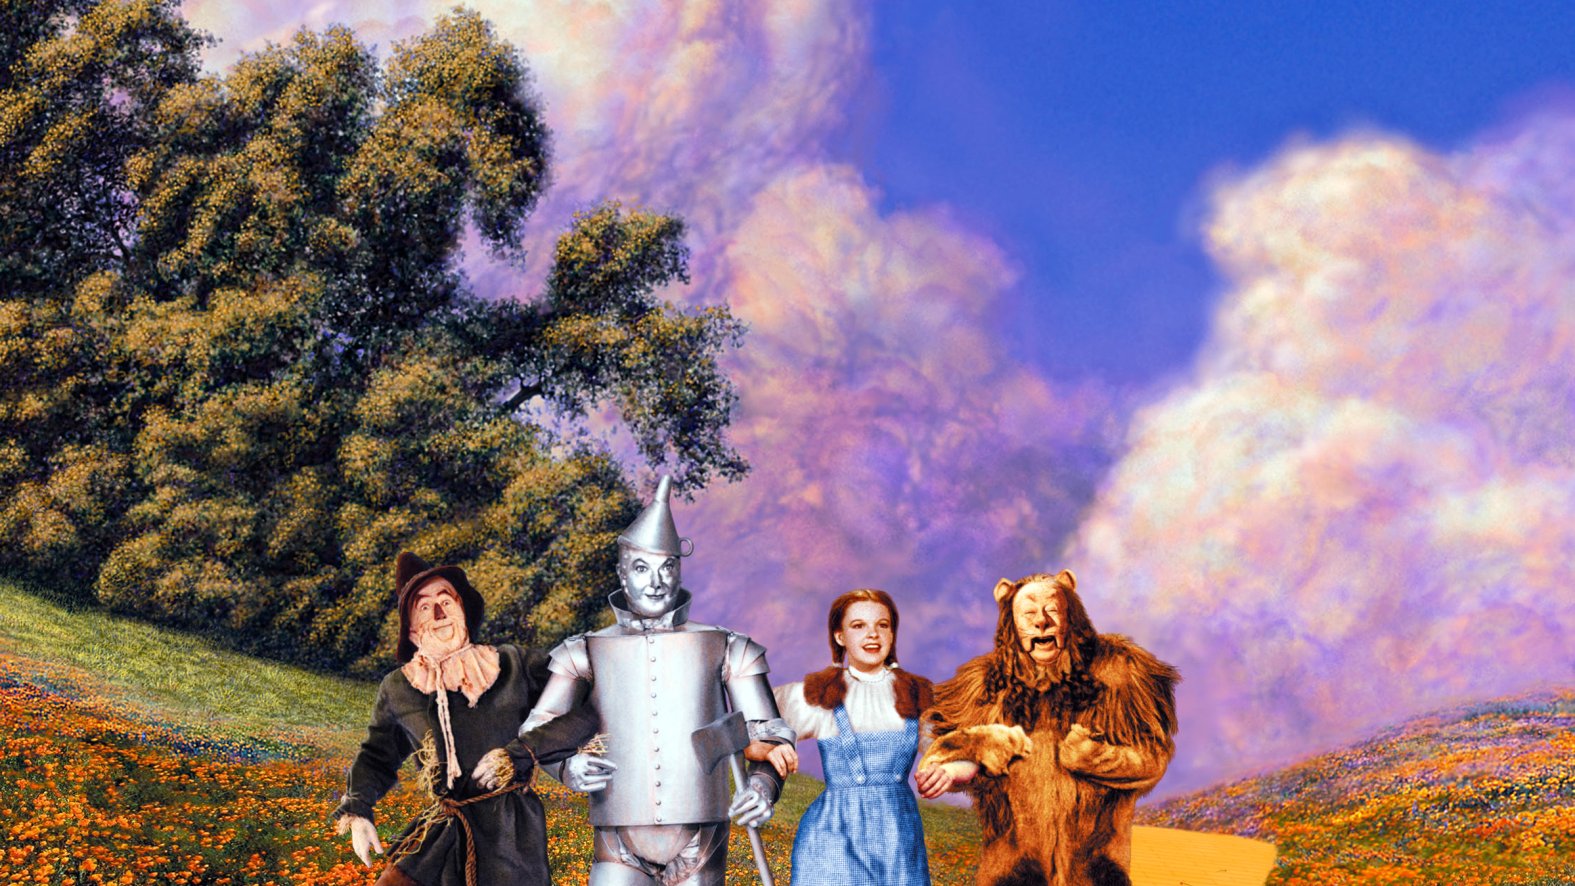 ‘Wizard of Oz’ Remake Now in the Works Will Be a ‘Fresh Take’ on the